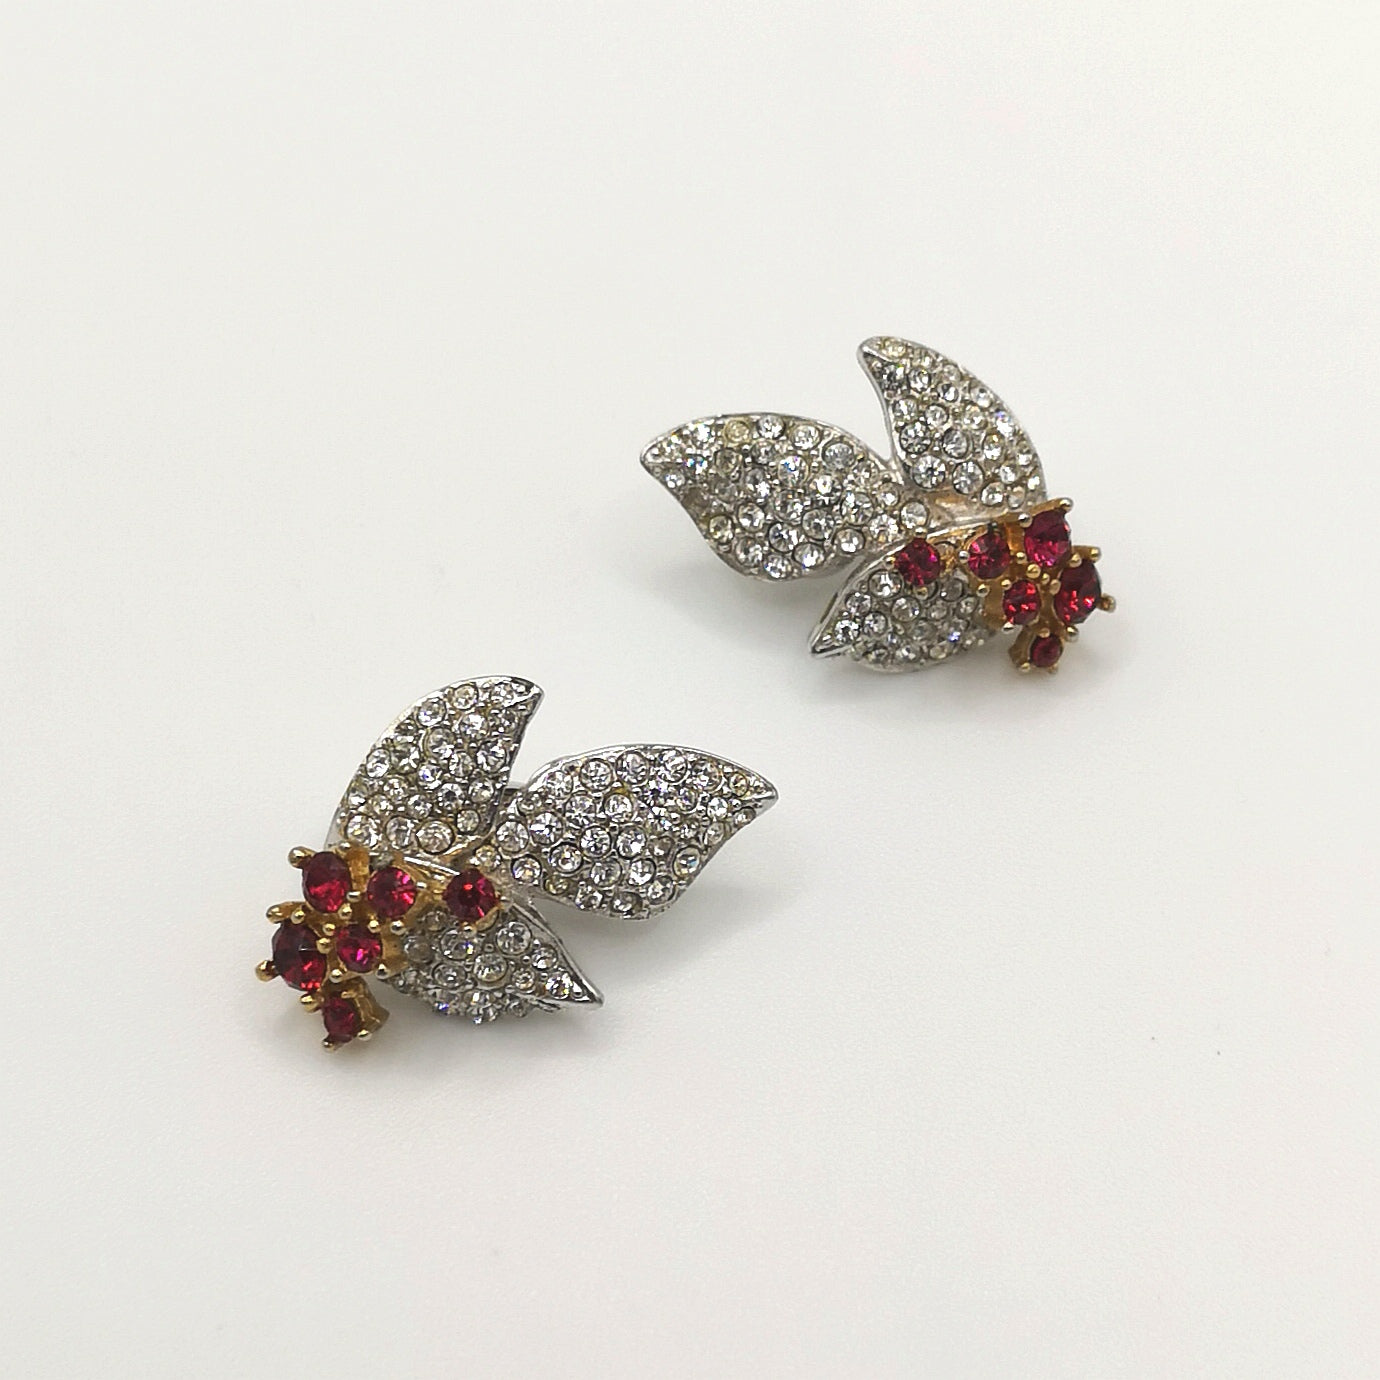 Vintage leaf motif earrings with white and red rhinestones in white metal - 1960 by Boucher